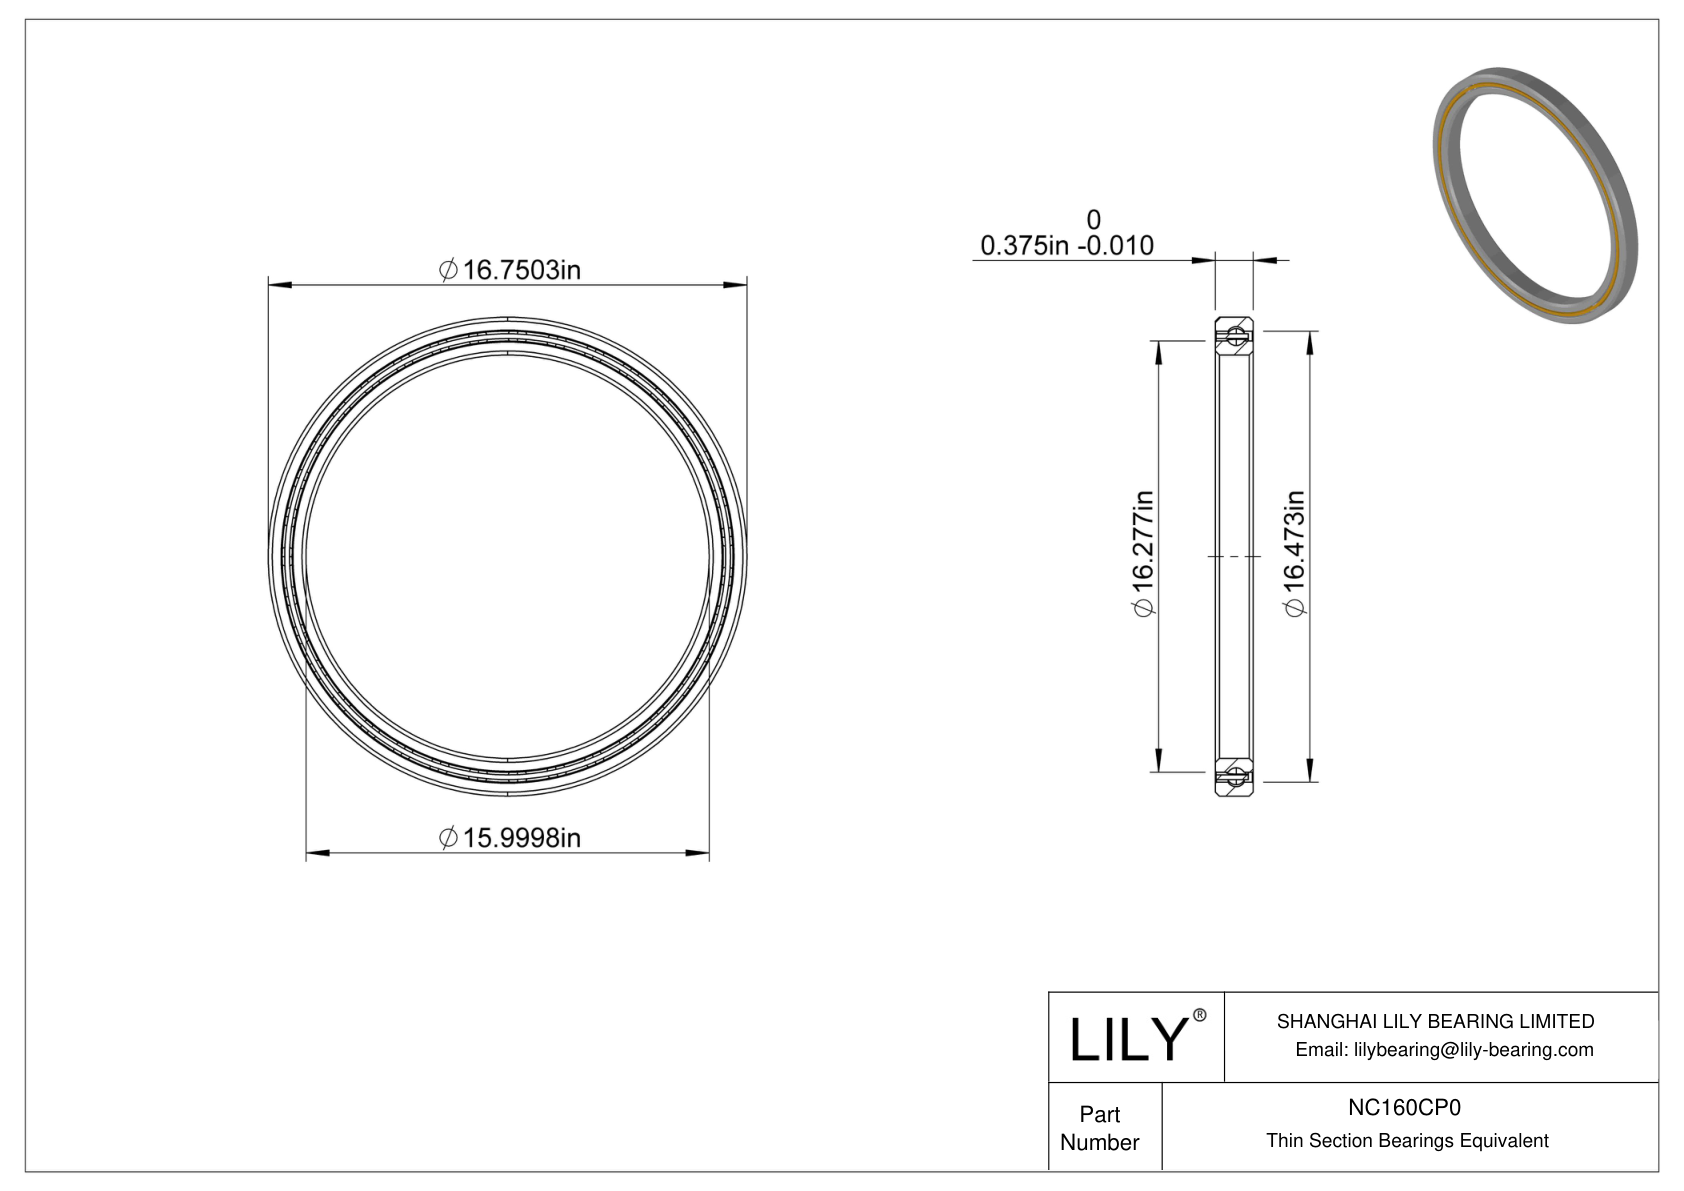 NC160CP0 Constant Section (CS) Bearings cad drawing